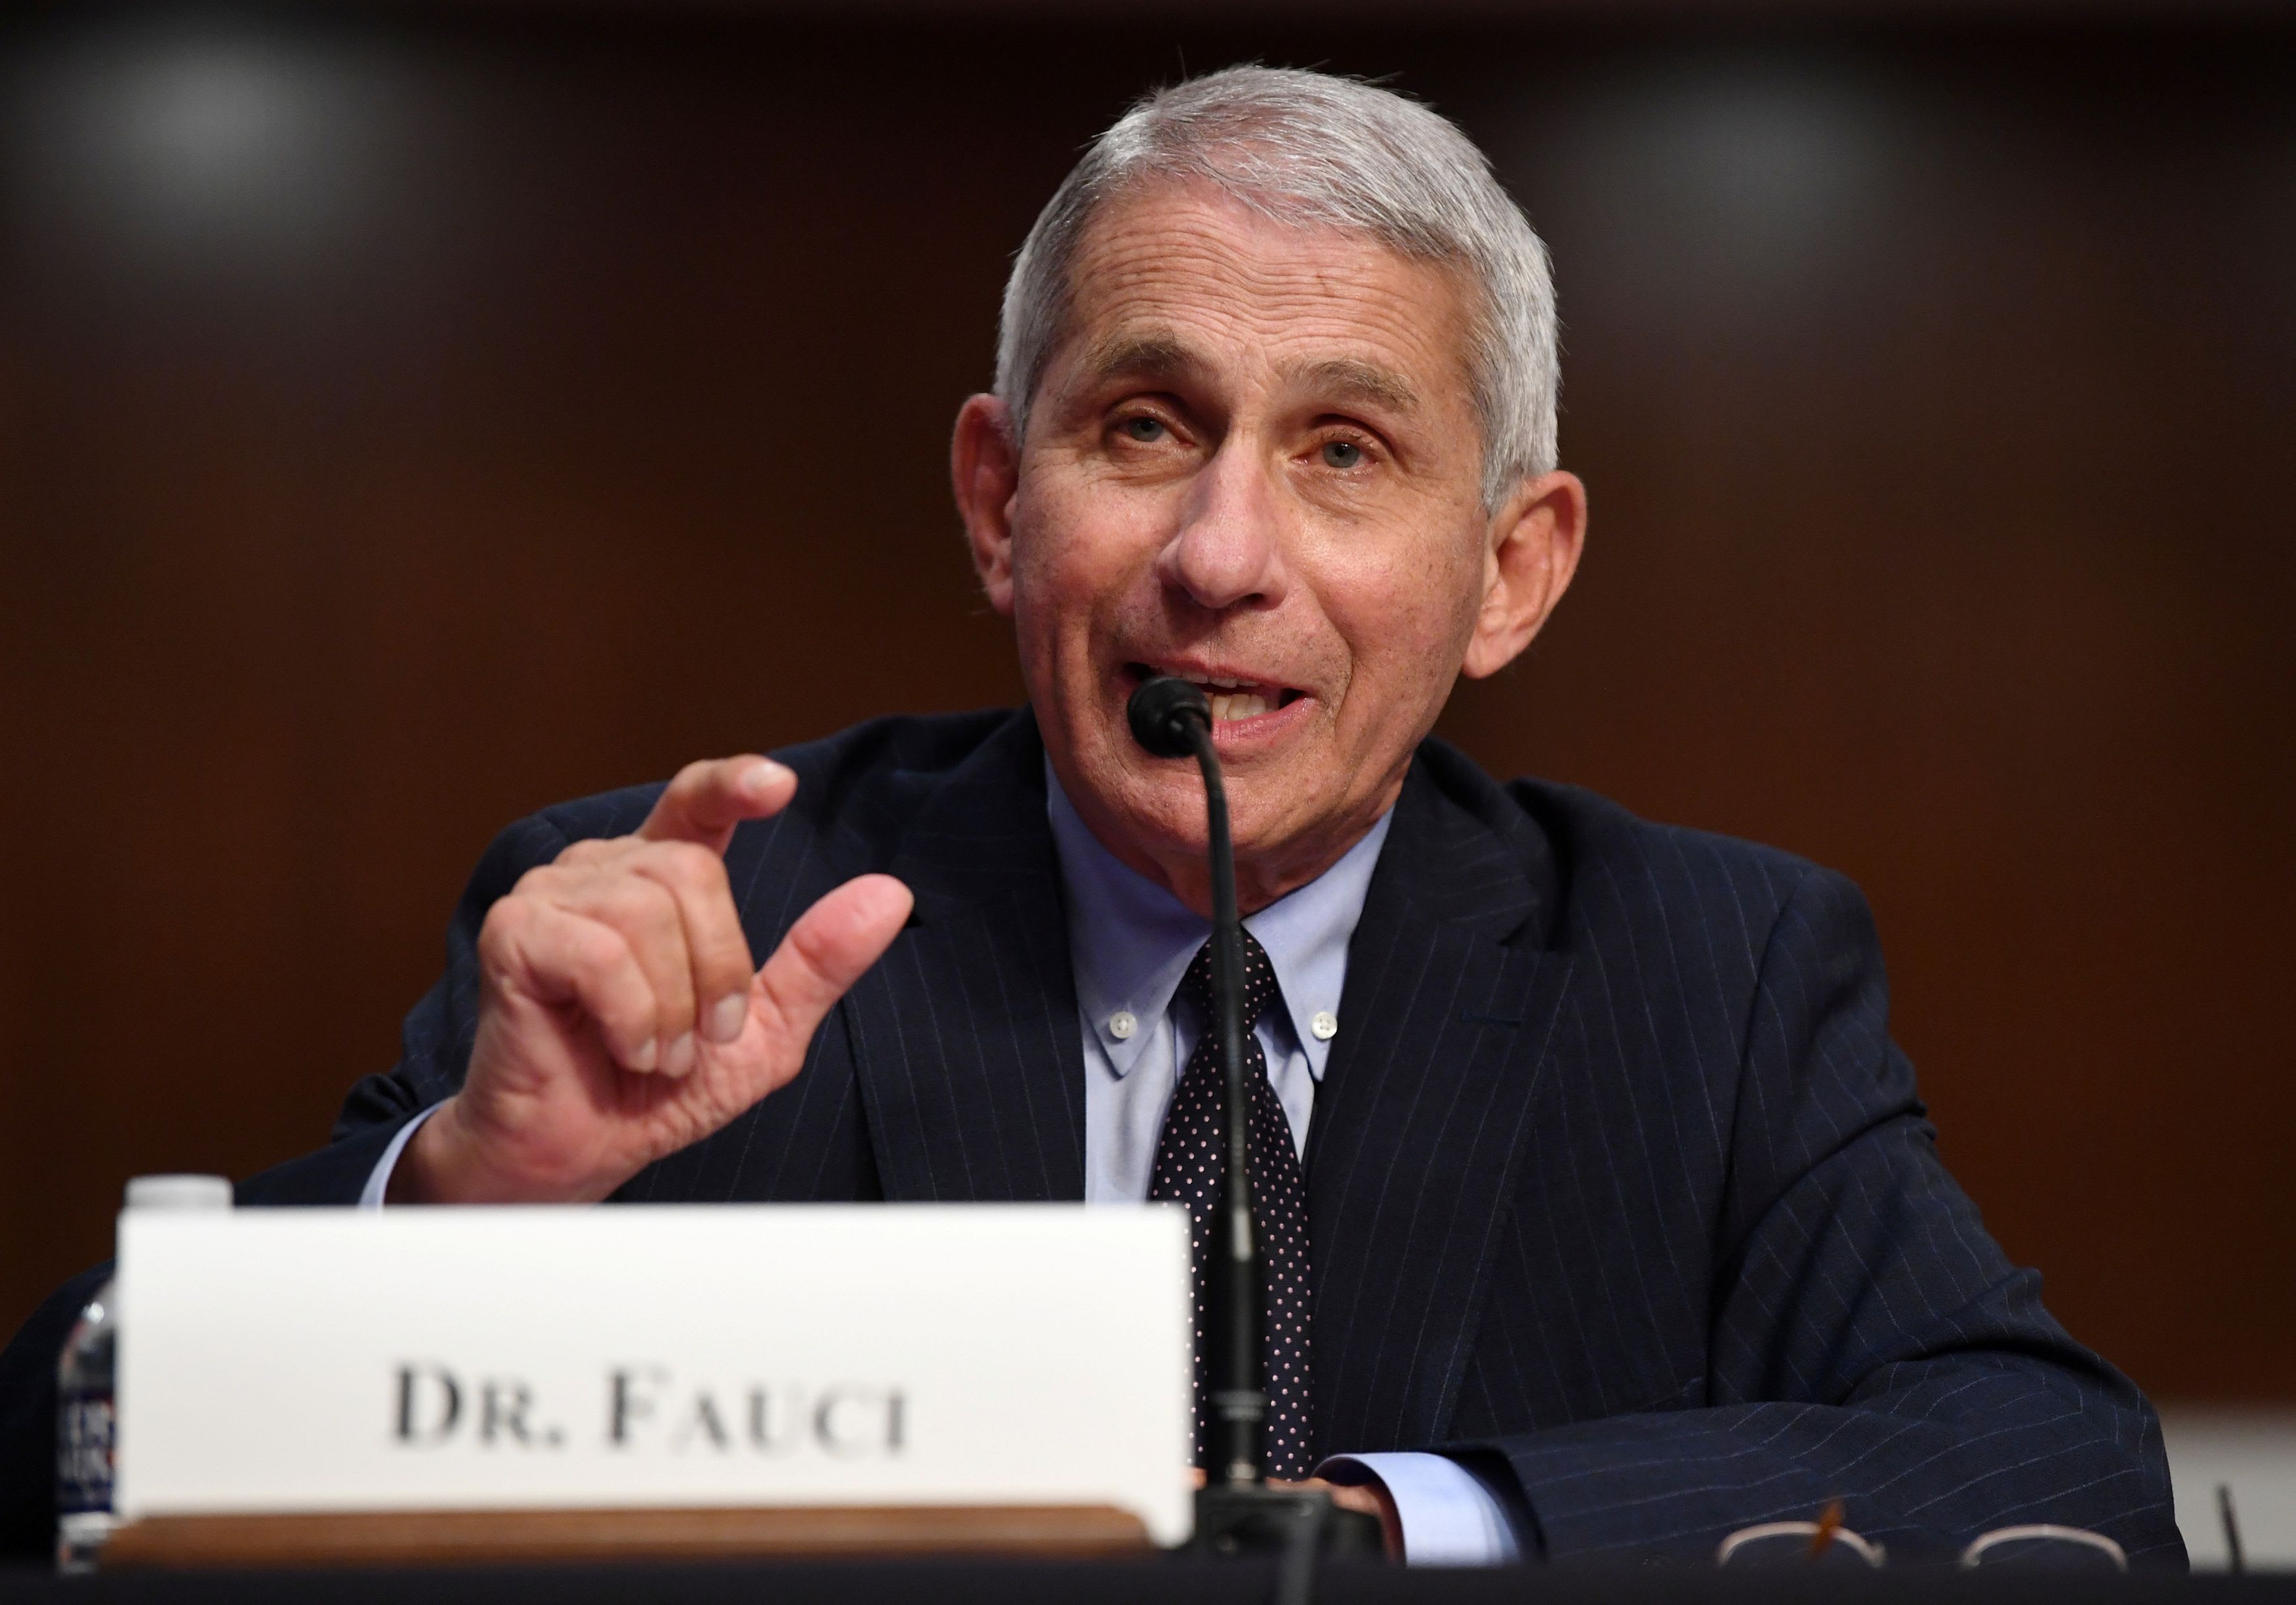 'The death toll would be enormous,' Fauci says of herd immunity to coronavirus in the U.S.